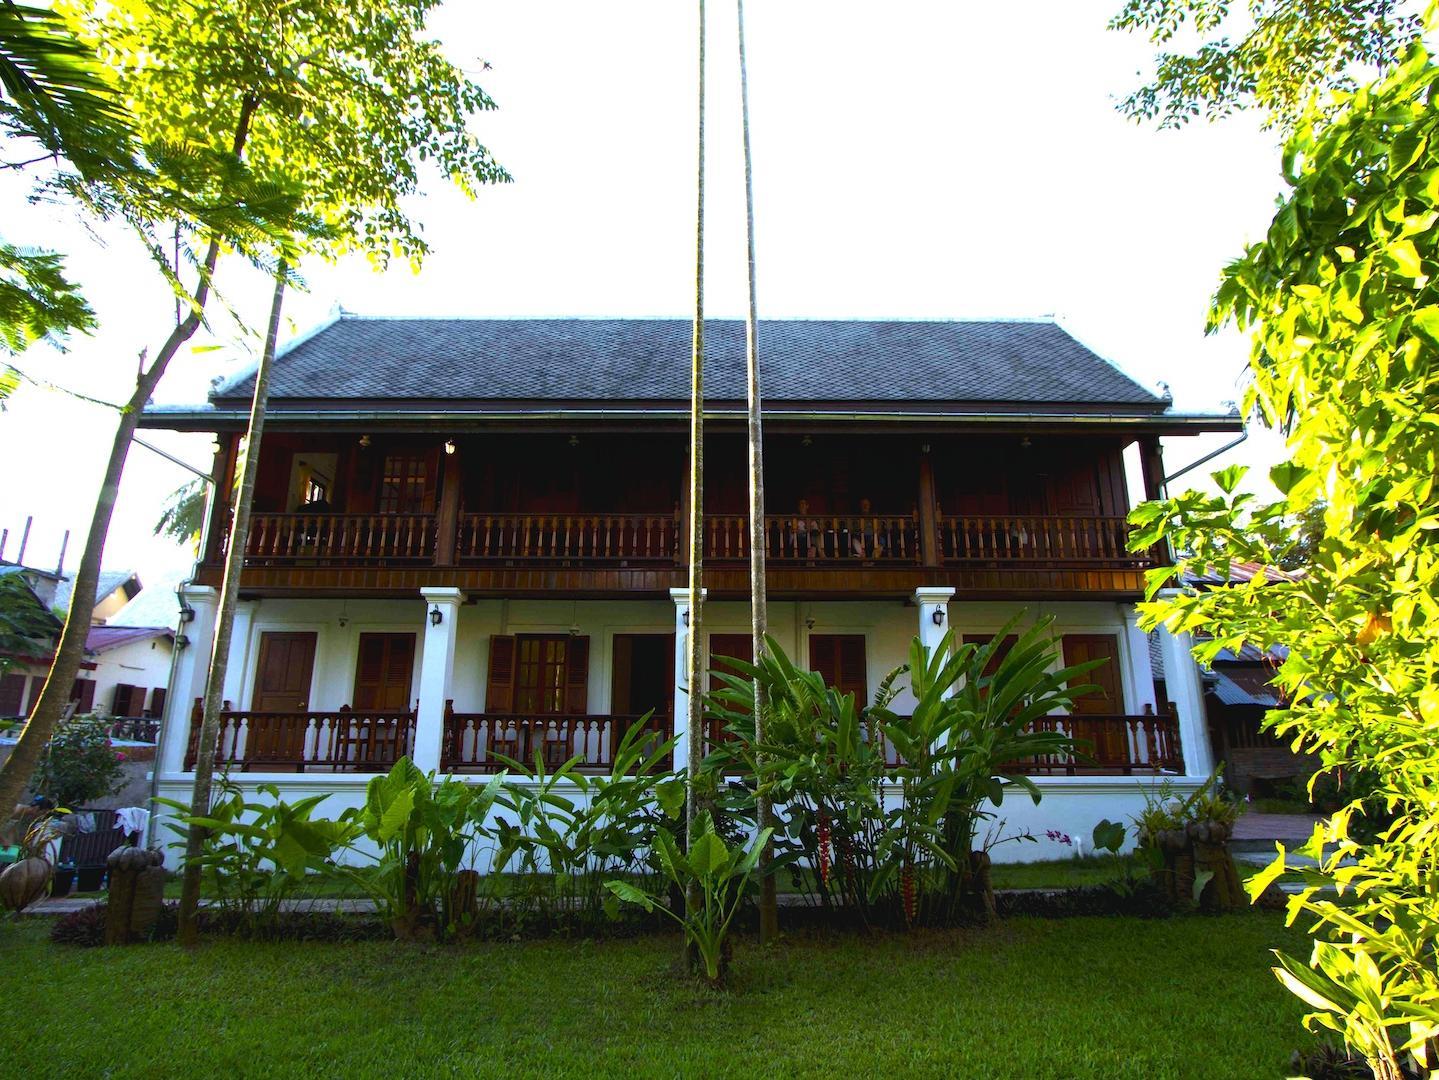 Villa Chitdara Luang Prabang FAQ 2016, What facilities are there in Villa Chitdara Luang Prabang 2016, What Languages Spoken are Supported in Villa Chitdara Luang Prabang 2016, Which payment cards are accepted in Villa Chitdara Luang Prabang , Luang Prabang Villa Chitdara room facilities and services Q&A 2016, Luang Prabang Villa Chitdara online booking services 2016, Luang Prabang Villa Chitdara address 2016, Luang Prabang Villa Chitdara telephone number 2016,Luang Prabang Villa Chitdara map 2016, Luang Prabang Villa Chitdara traffic guide 2016, how to go Luang Prabang Villa Chitdara, Luang Prabang Villa Chitdara booking online 2016, Luang Prabang Villa Chitdara room types 2016.